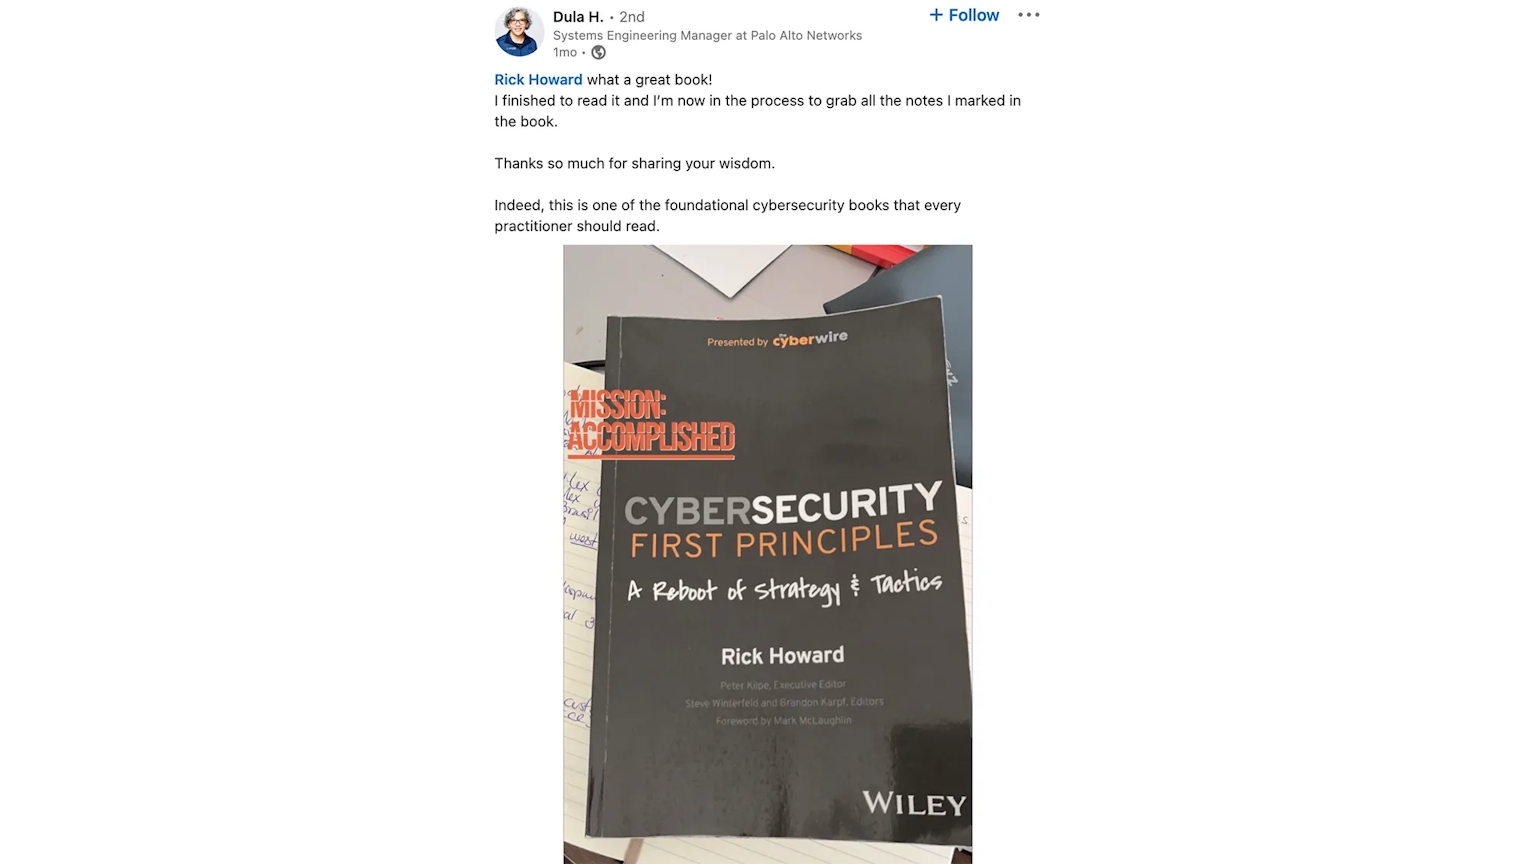 reader's feedback for the Cybersecurity first principles